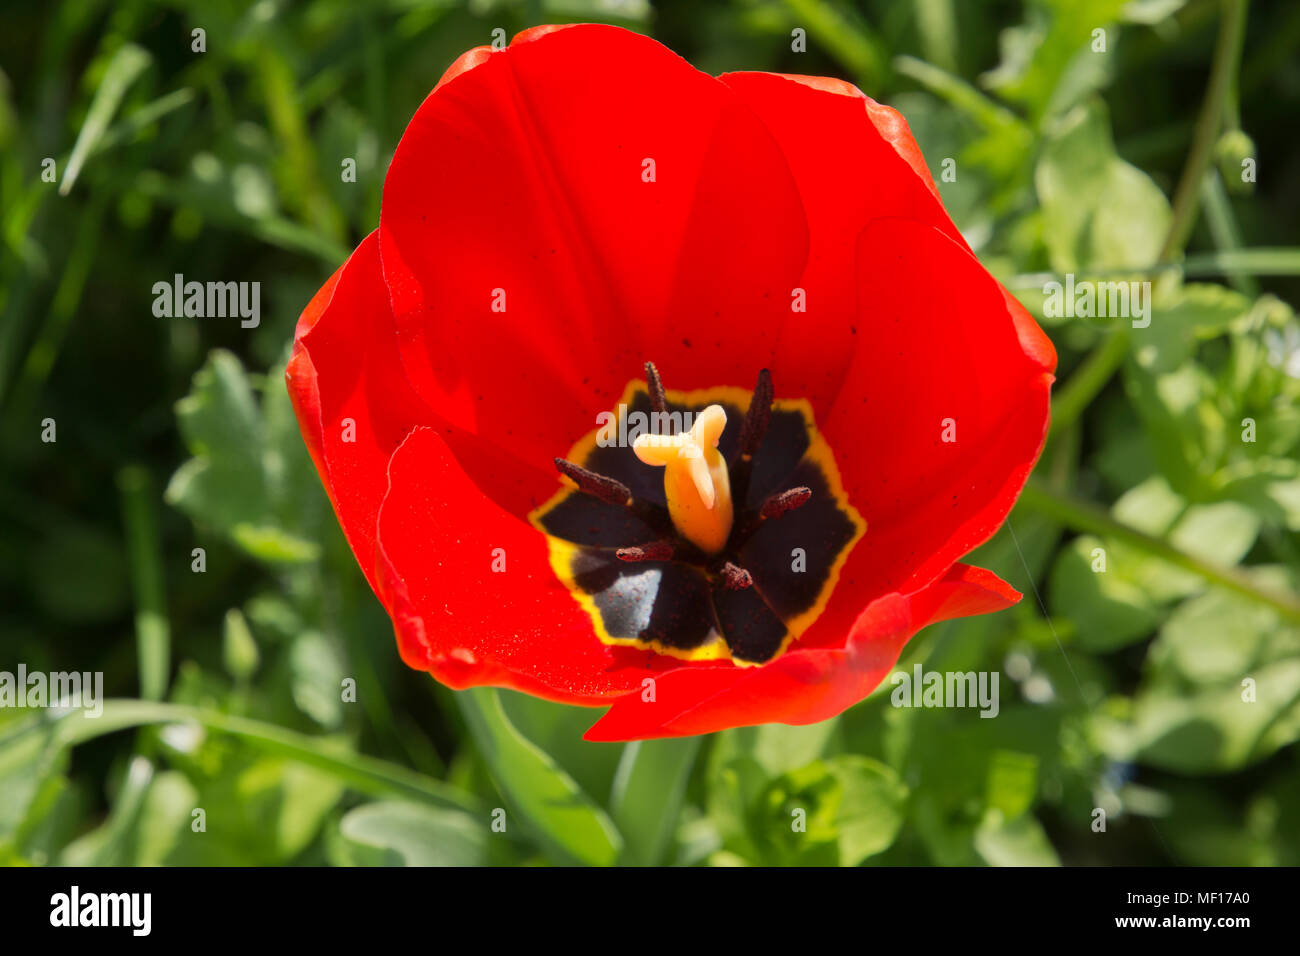 Close up of a red tulip in the garden seen from above Stock Photo